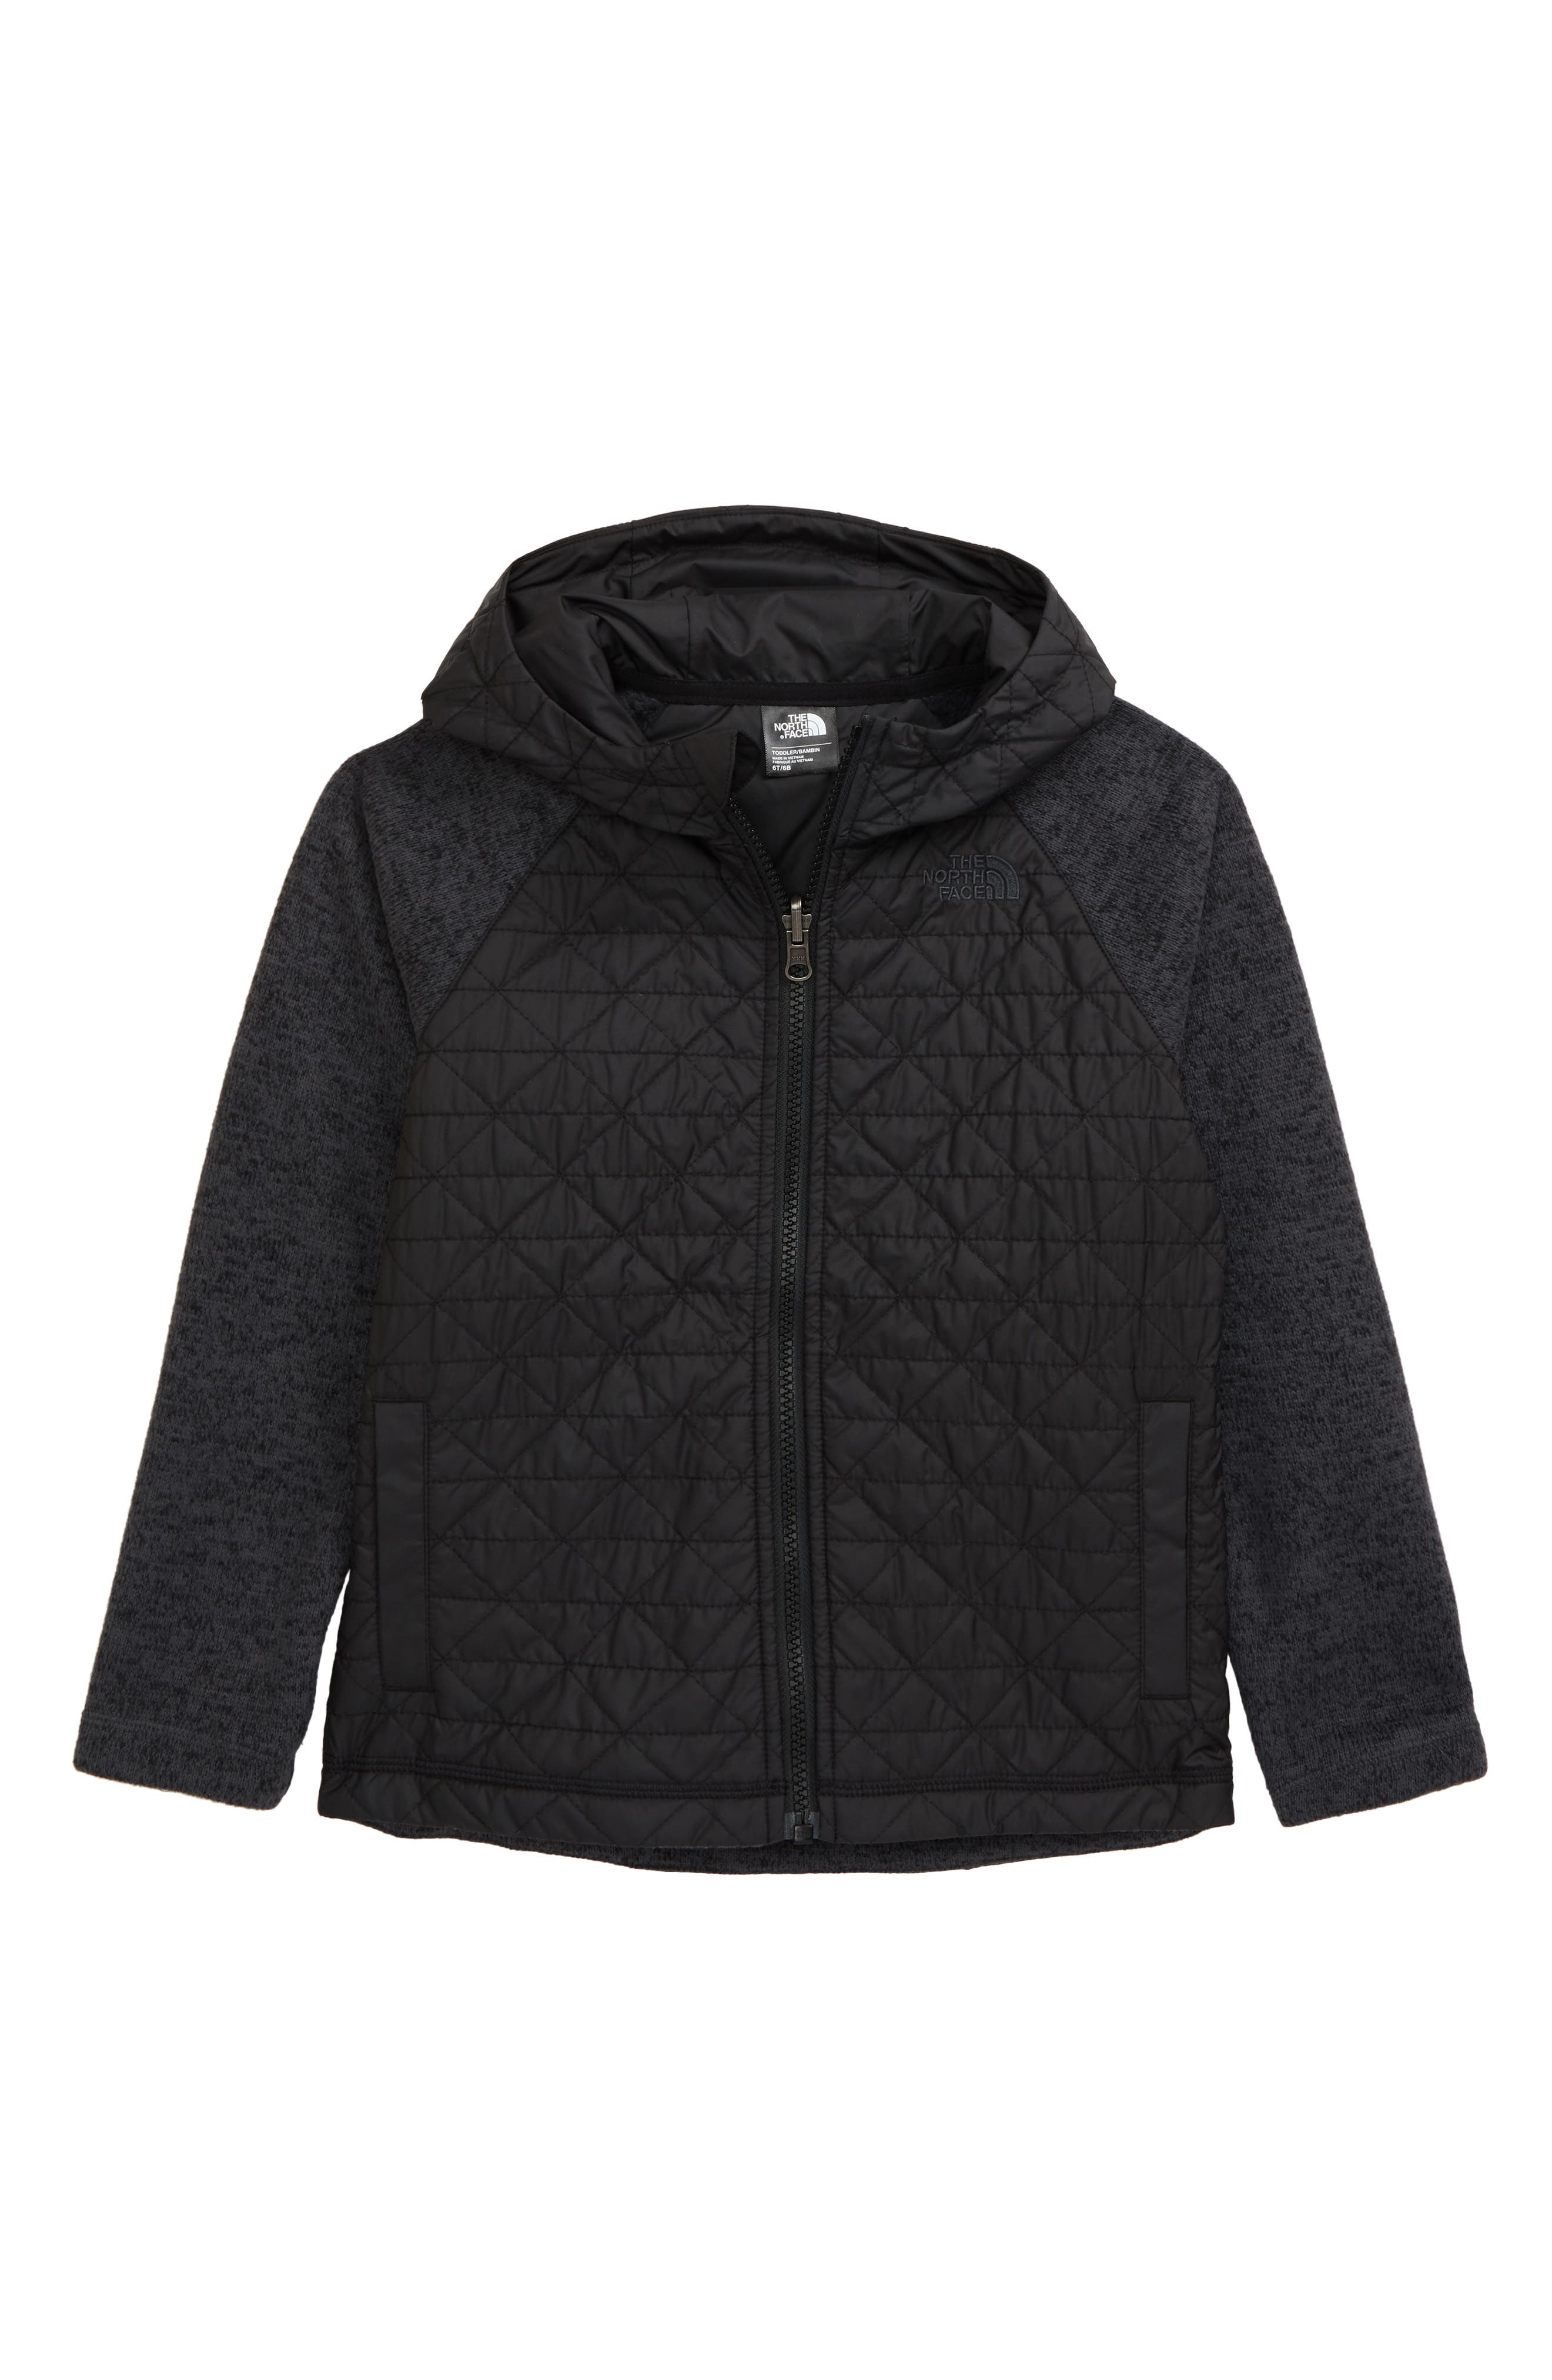 north face quilted hoodie